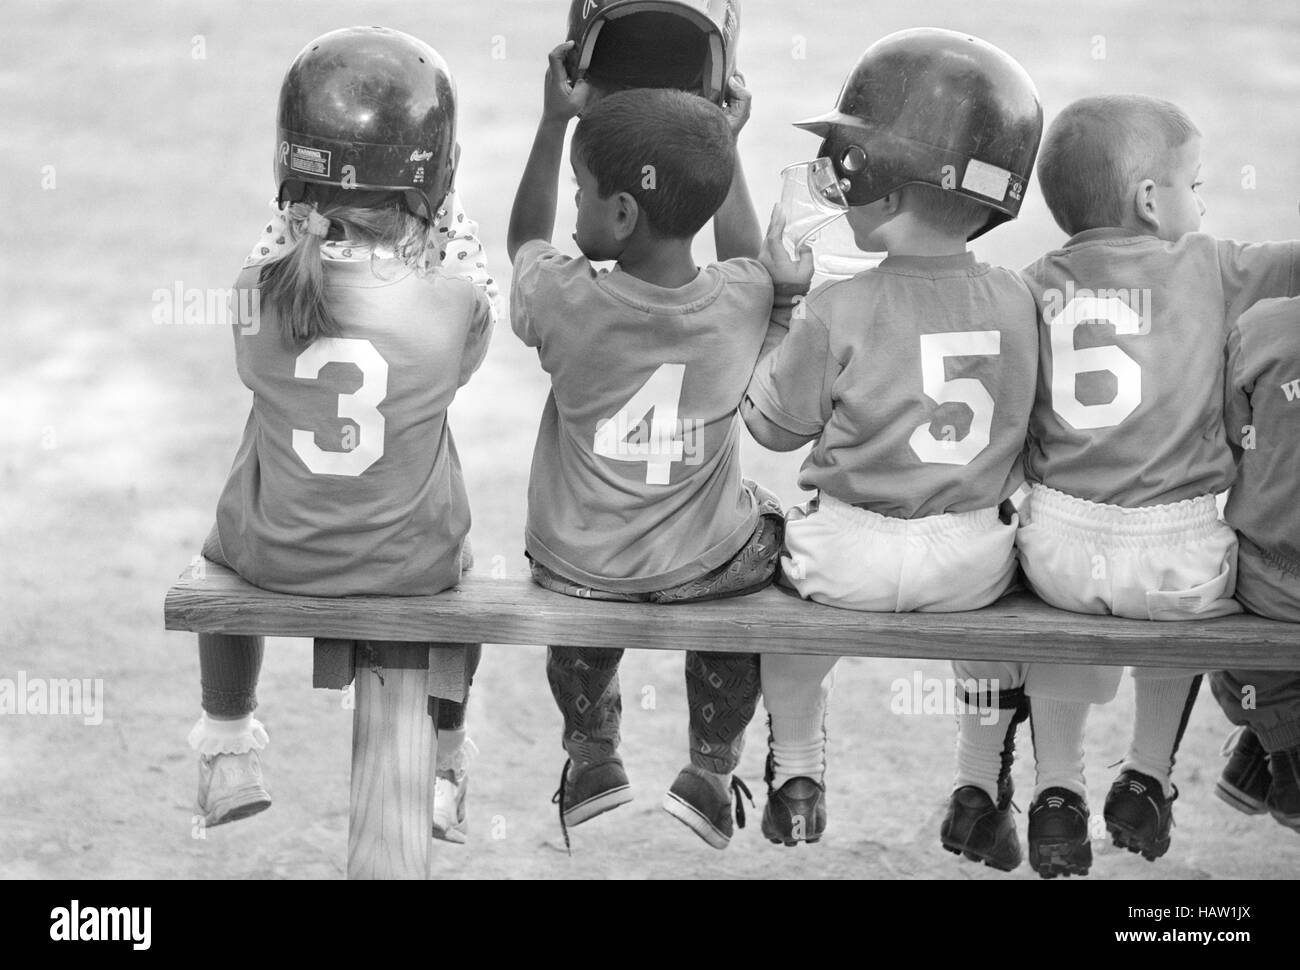 Four young baseball players wearing sequential numbers. Stock Photo